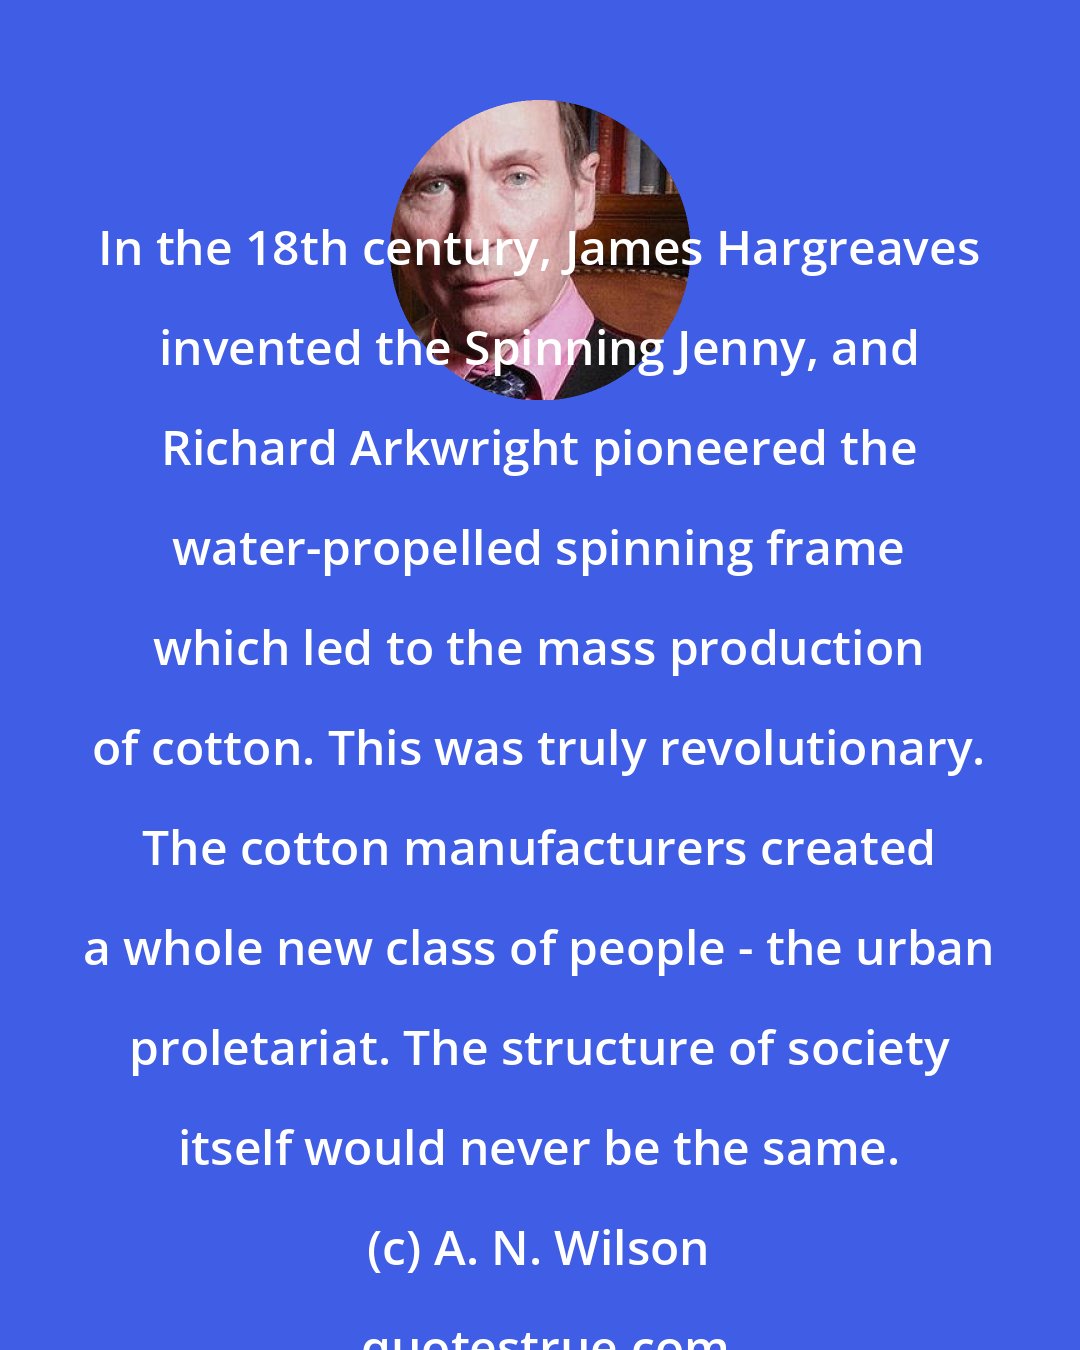 A. N. Wilson: In the 18th century, James Hargreaves invented the Spinning Jenny, and Richard Arkwright pioneered the water-propelled spinning frame which led to the mass production of cotton. This was truly revolutionary. The cotton manufacturers created a whole new class of people - the urban proletariat. The structure of society itself would never be the same.